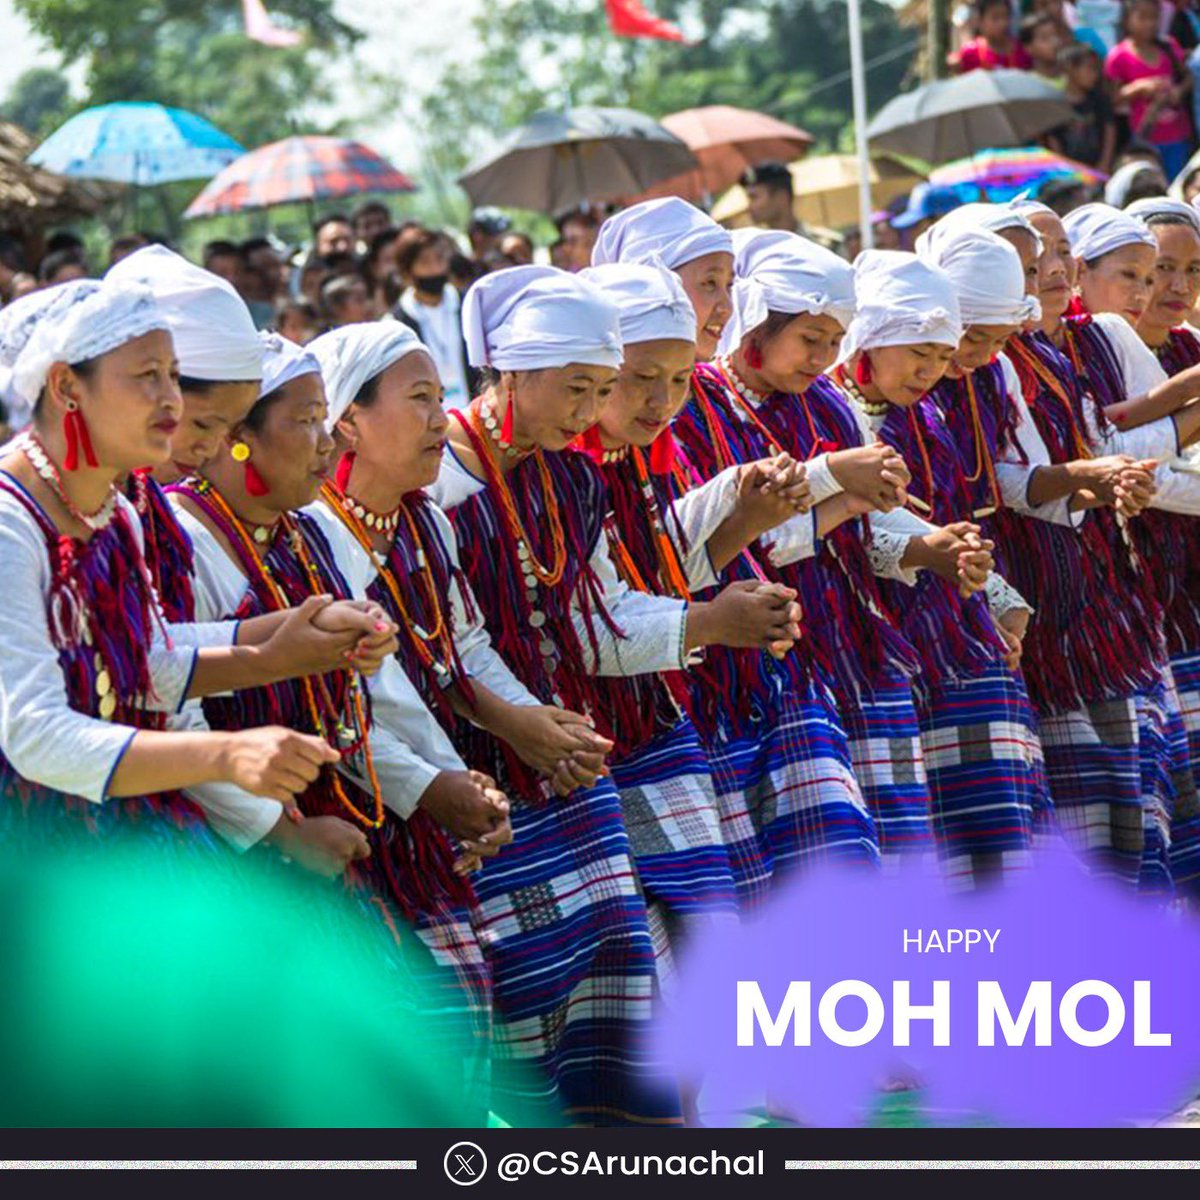 Warm greetings to the #Tangsa community on the joyous occasion of the #MohMol.

May this auspicious festival be a time of communal harmony, solidarity, and peace, uniting hearts and fostering a deep sense of togetherness among all.